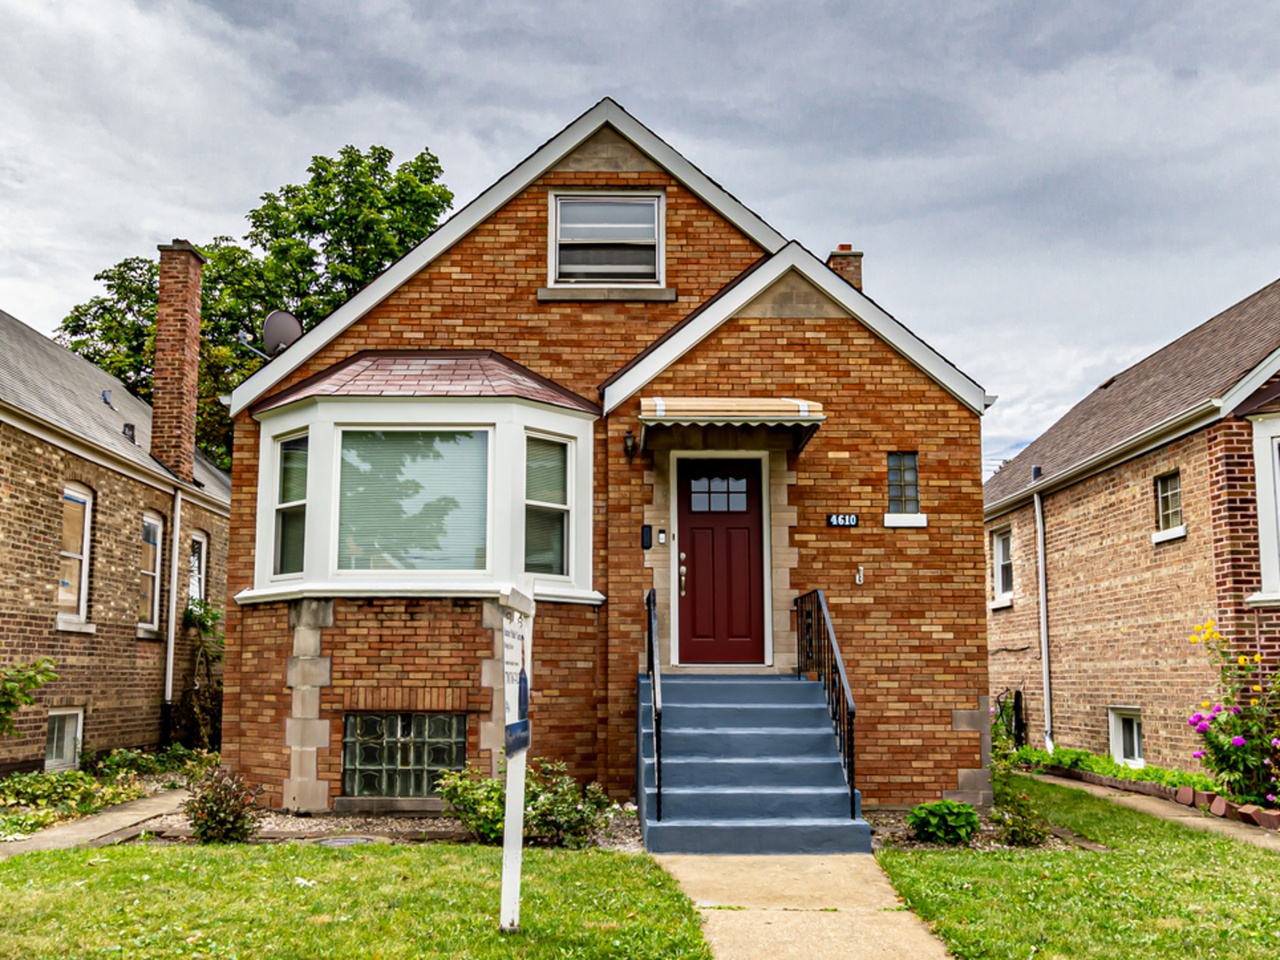 4610 S Kedvale Ave Chicago Il Mls Redfin